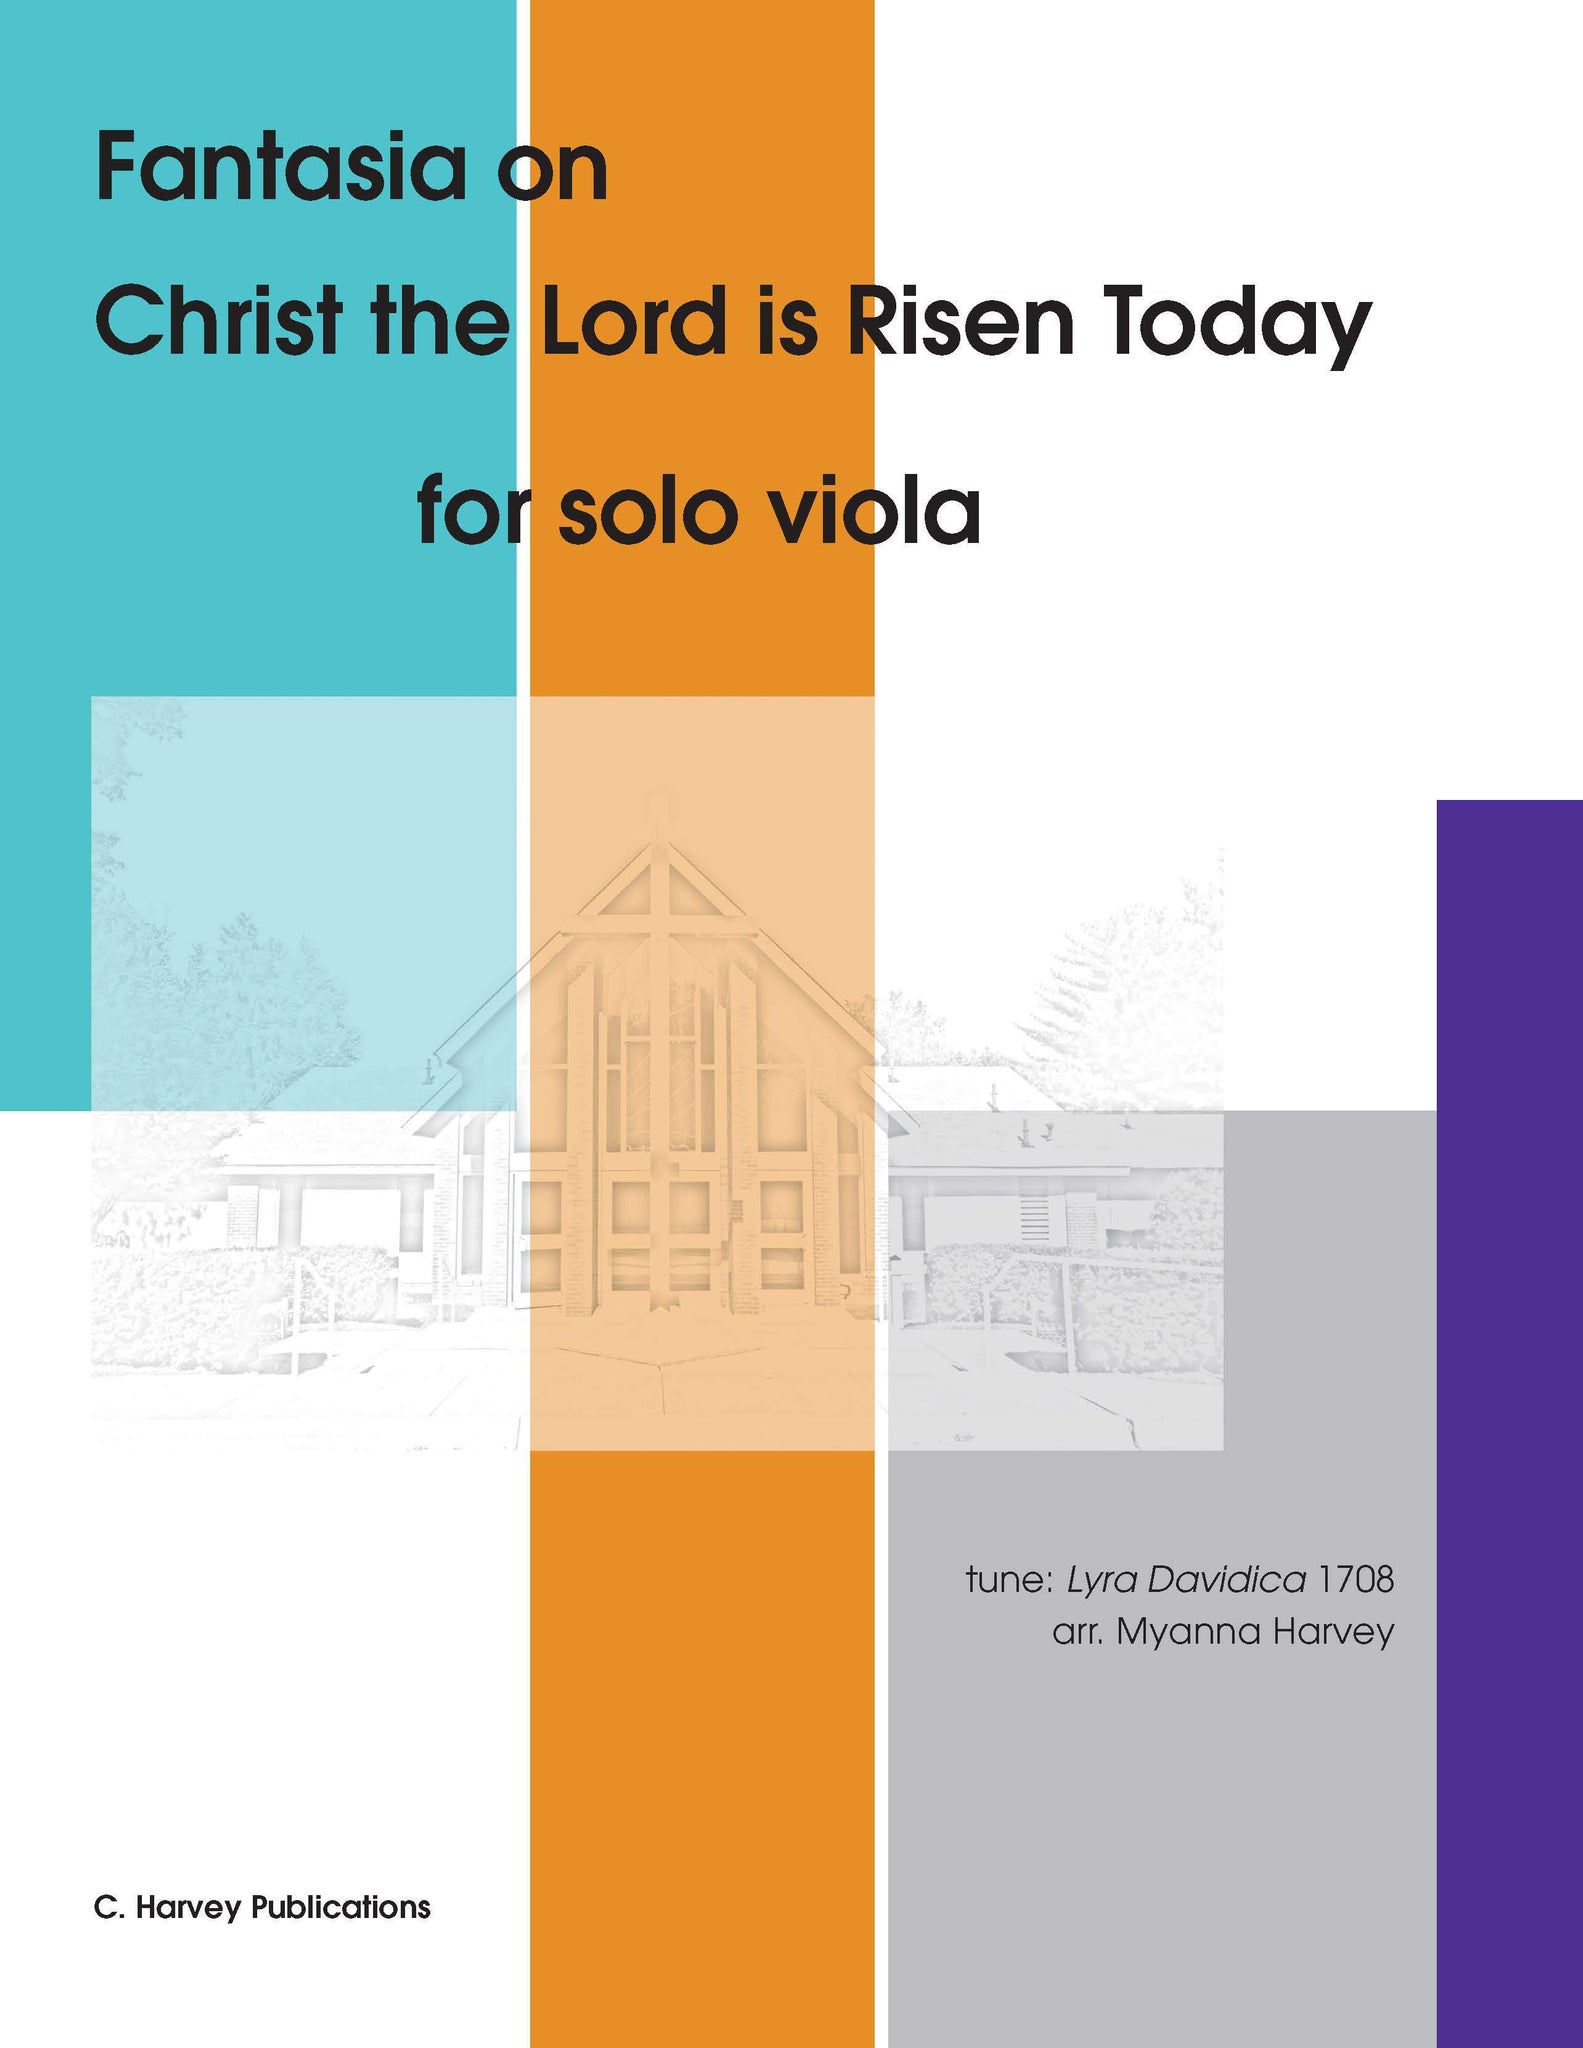 Fantasia on "Christ the Lord is Risen Today" for Solo Viola - an Easter Hymn - PDF download